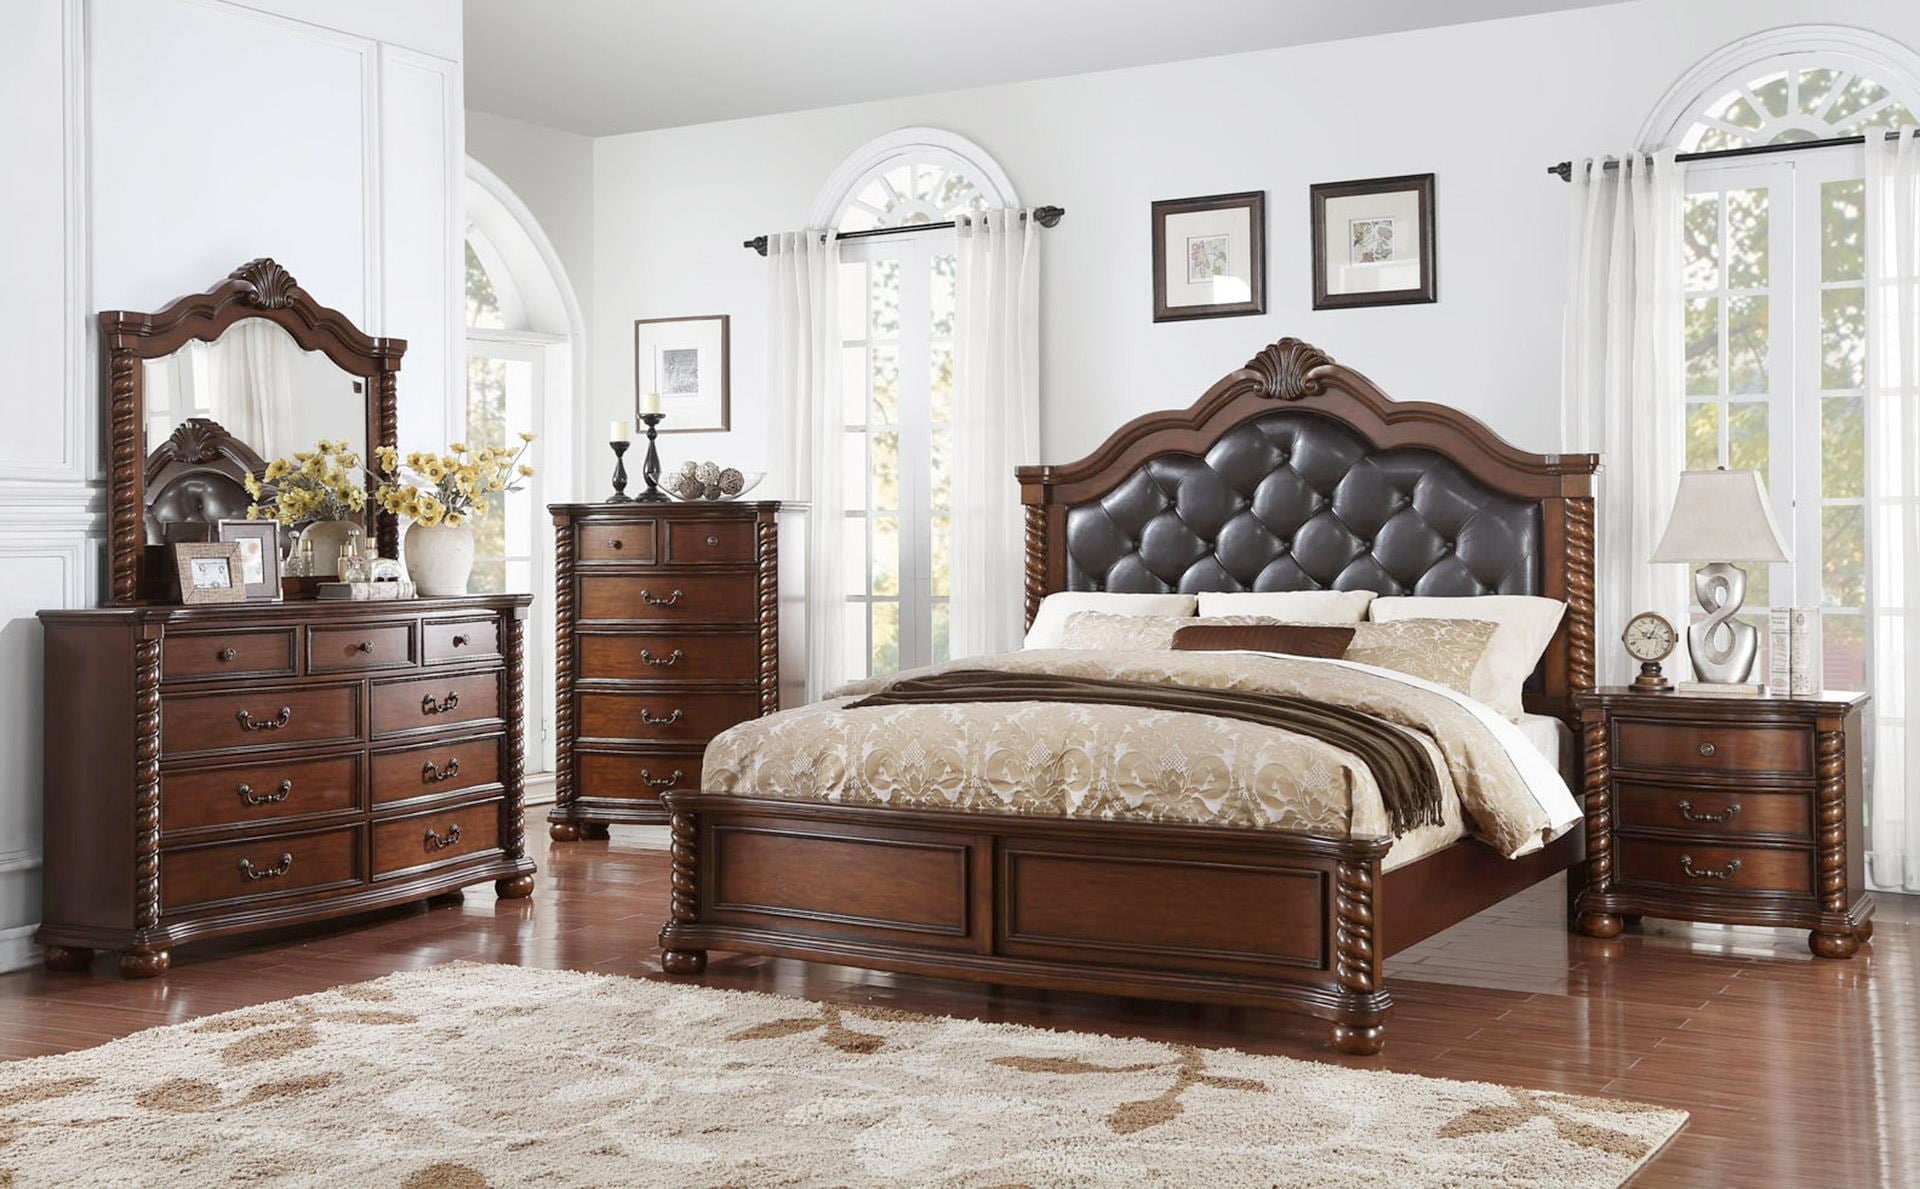 Special edition of online virtual shopping for furniture Lake Wylie Home Furniture